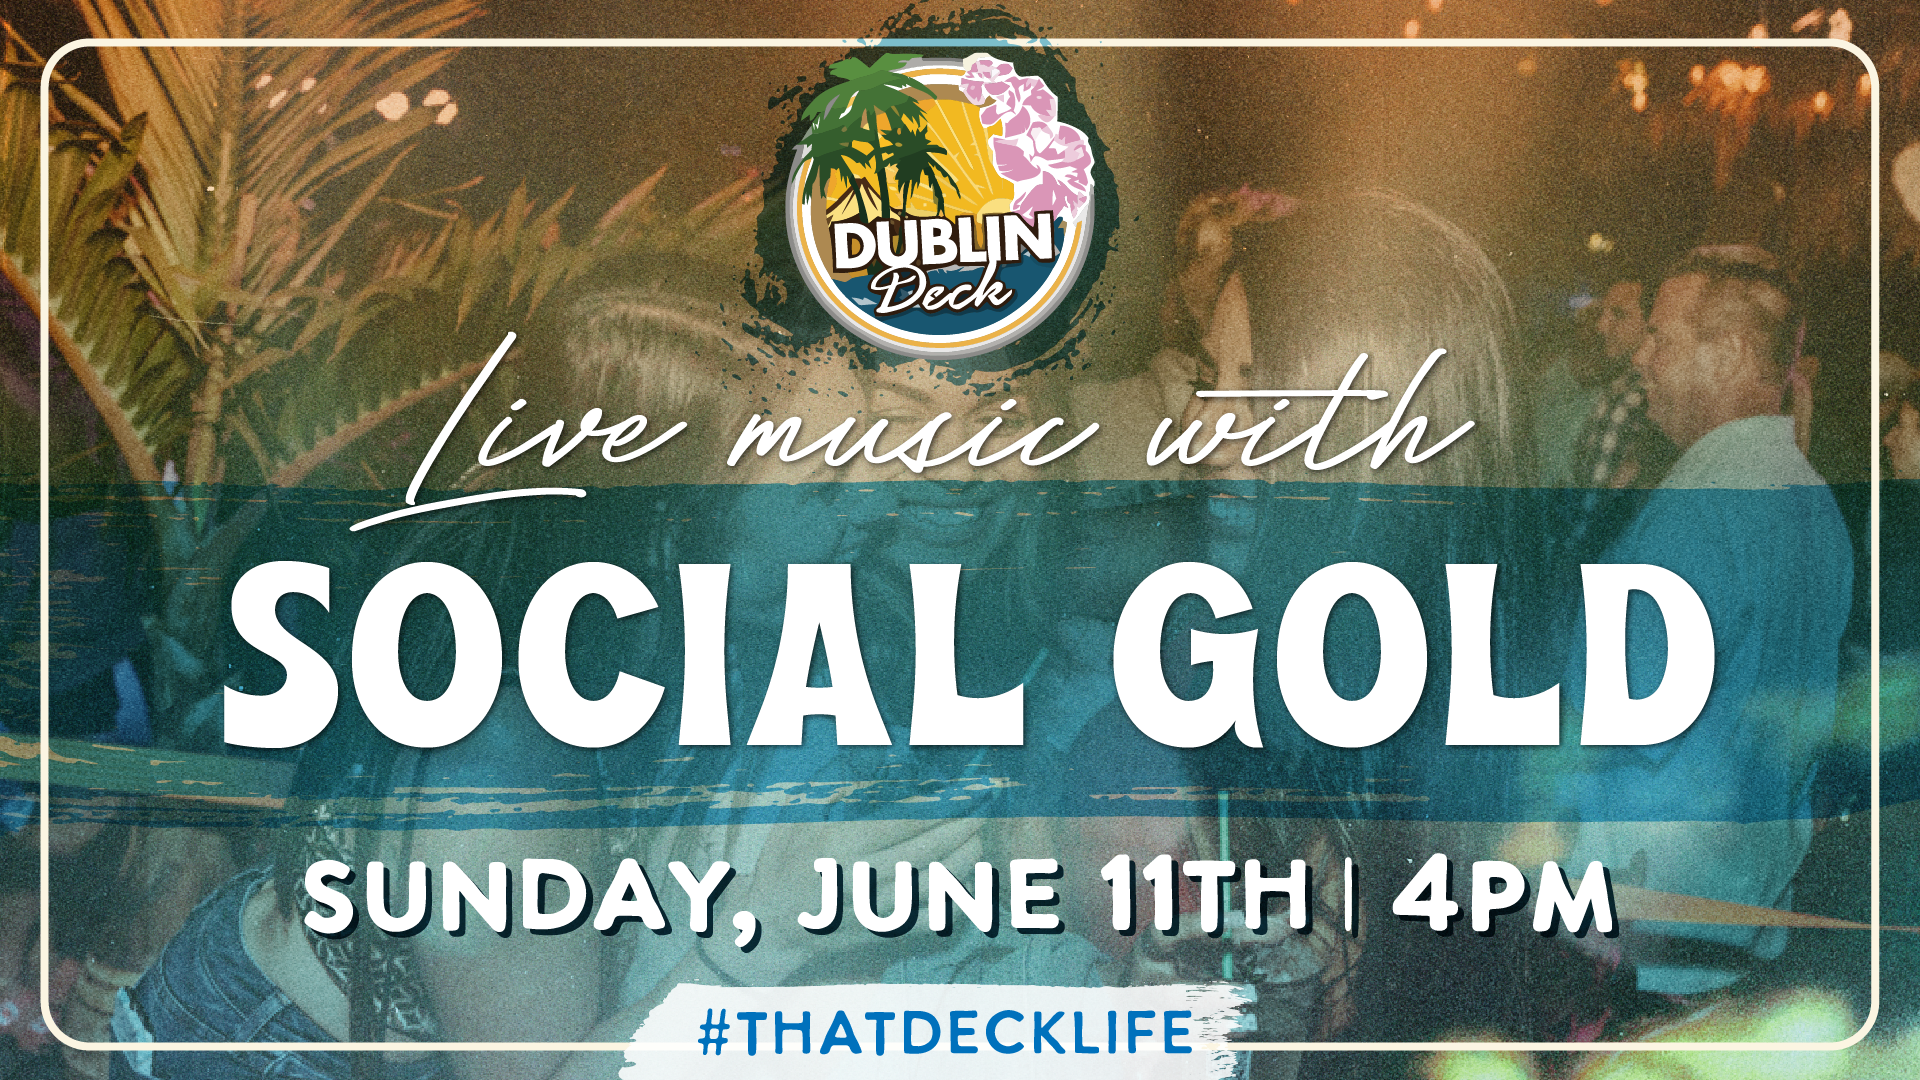 Sunday Funday is well spent at Dublin Deck with Social Gold! Music starts at 4PM